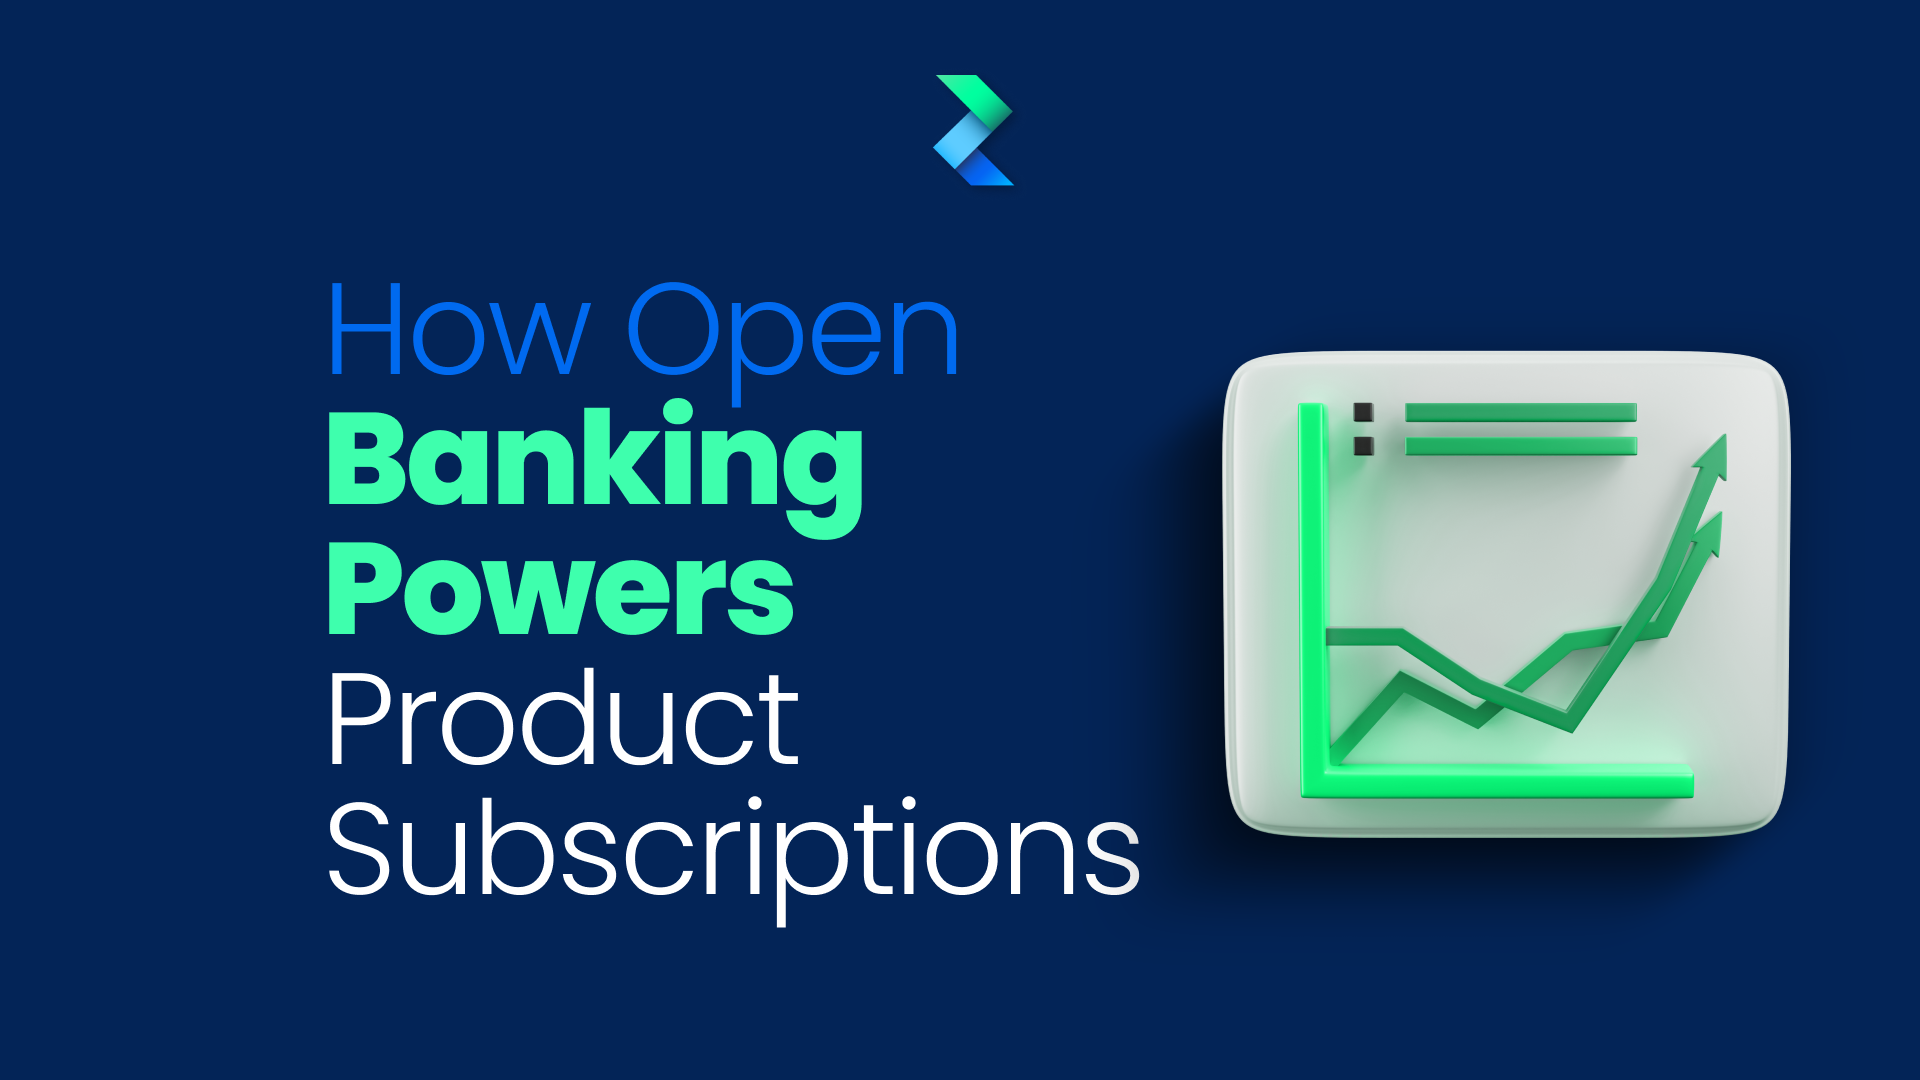 How Open Banking Powers Product Subscriptions